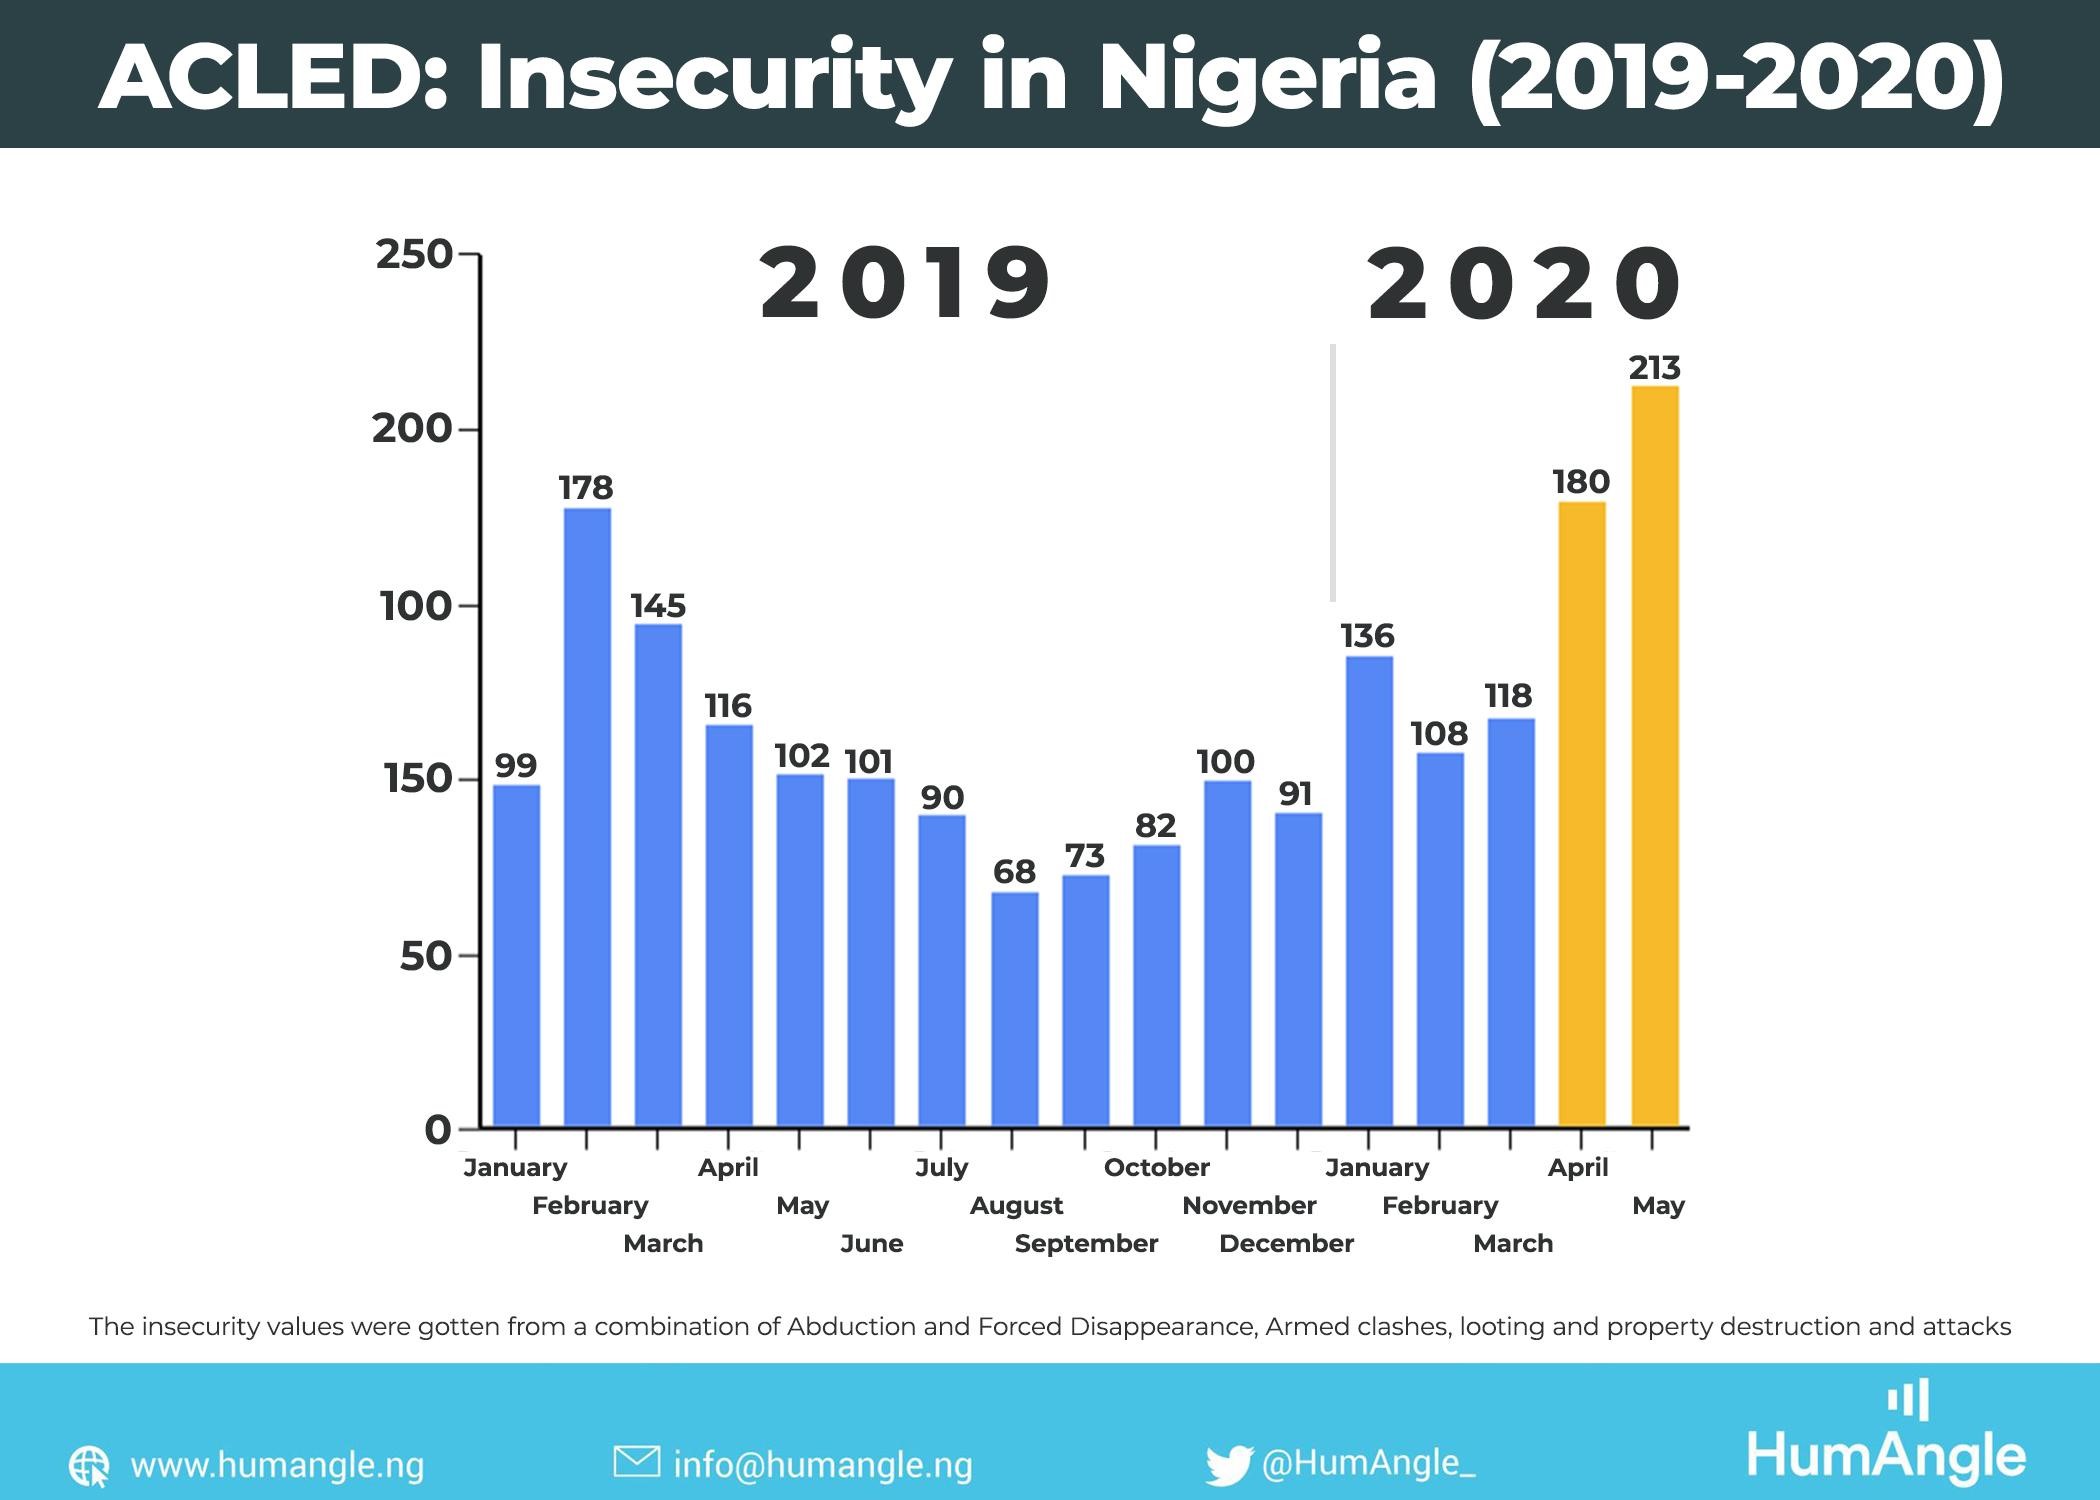 Data Crime Rates, Insecurity Worsened Significantly In Nigeria During Lockdown 2